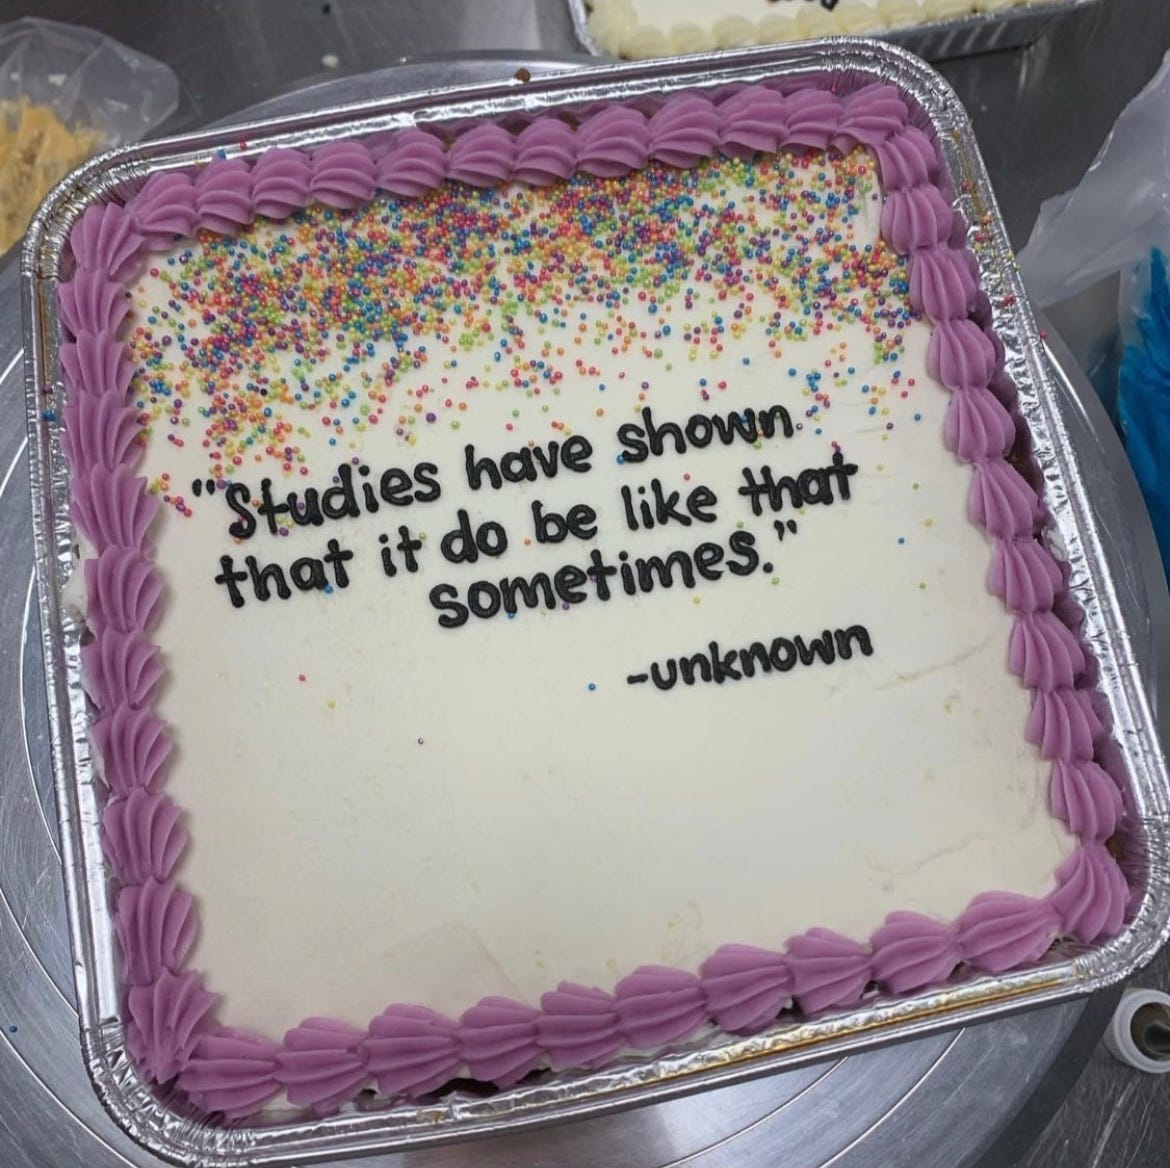 A picture of a square cake in an aluminum container, with white icing and purple frosting piped around the edges. Sprinkles cover the top half of the cake, and in the center of the cake are piped these words: "studies have shown that it do be like that sometimes," which is attributed to unknown.